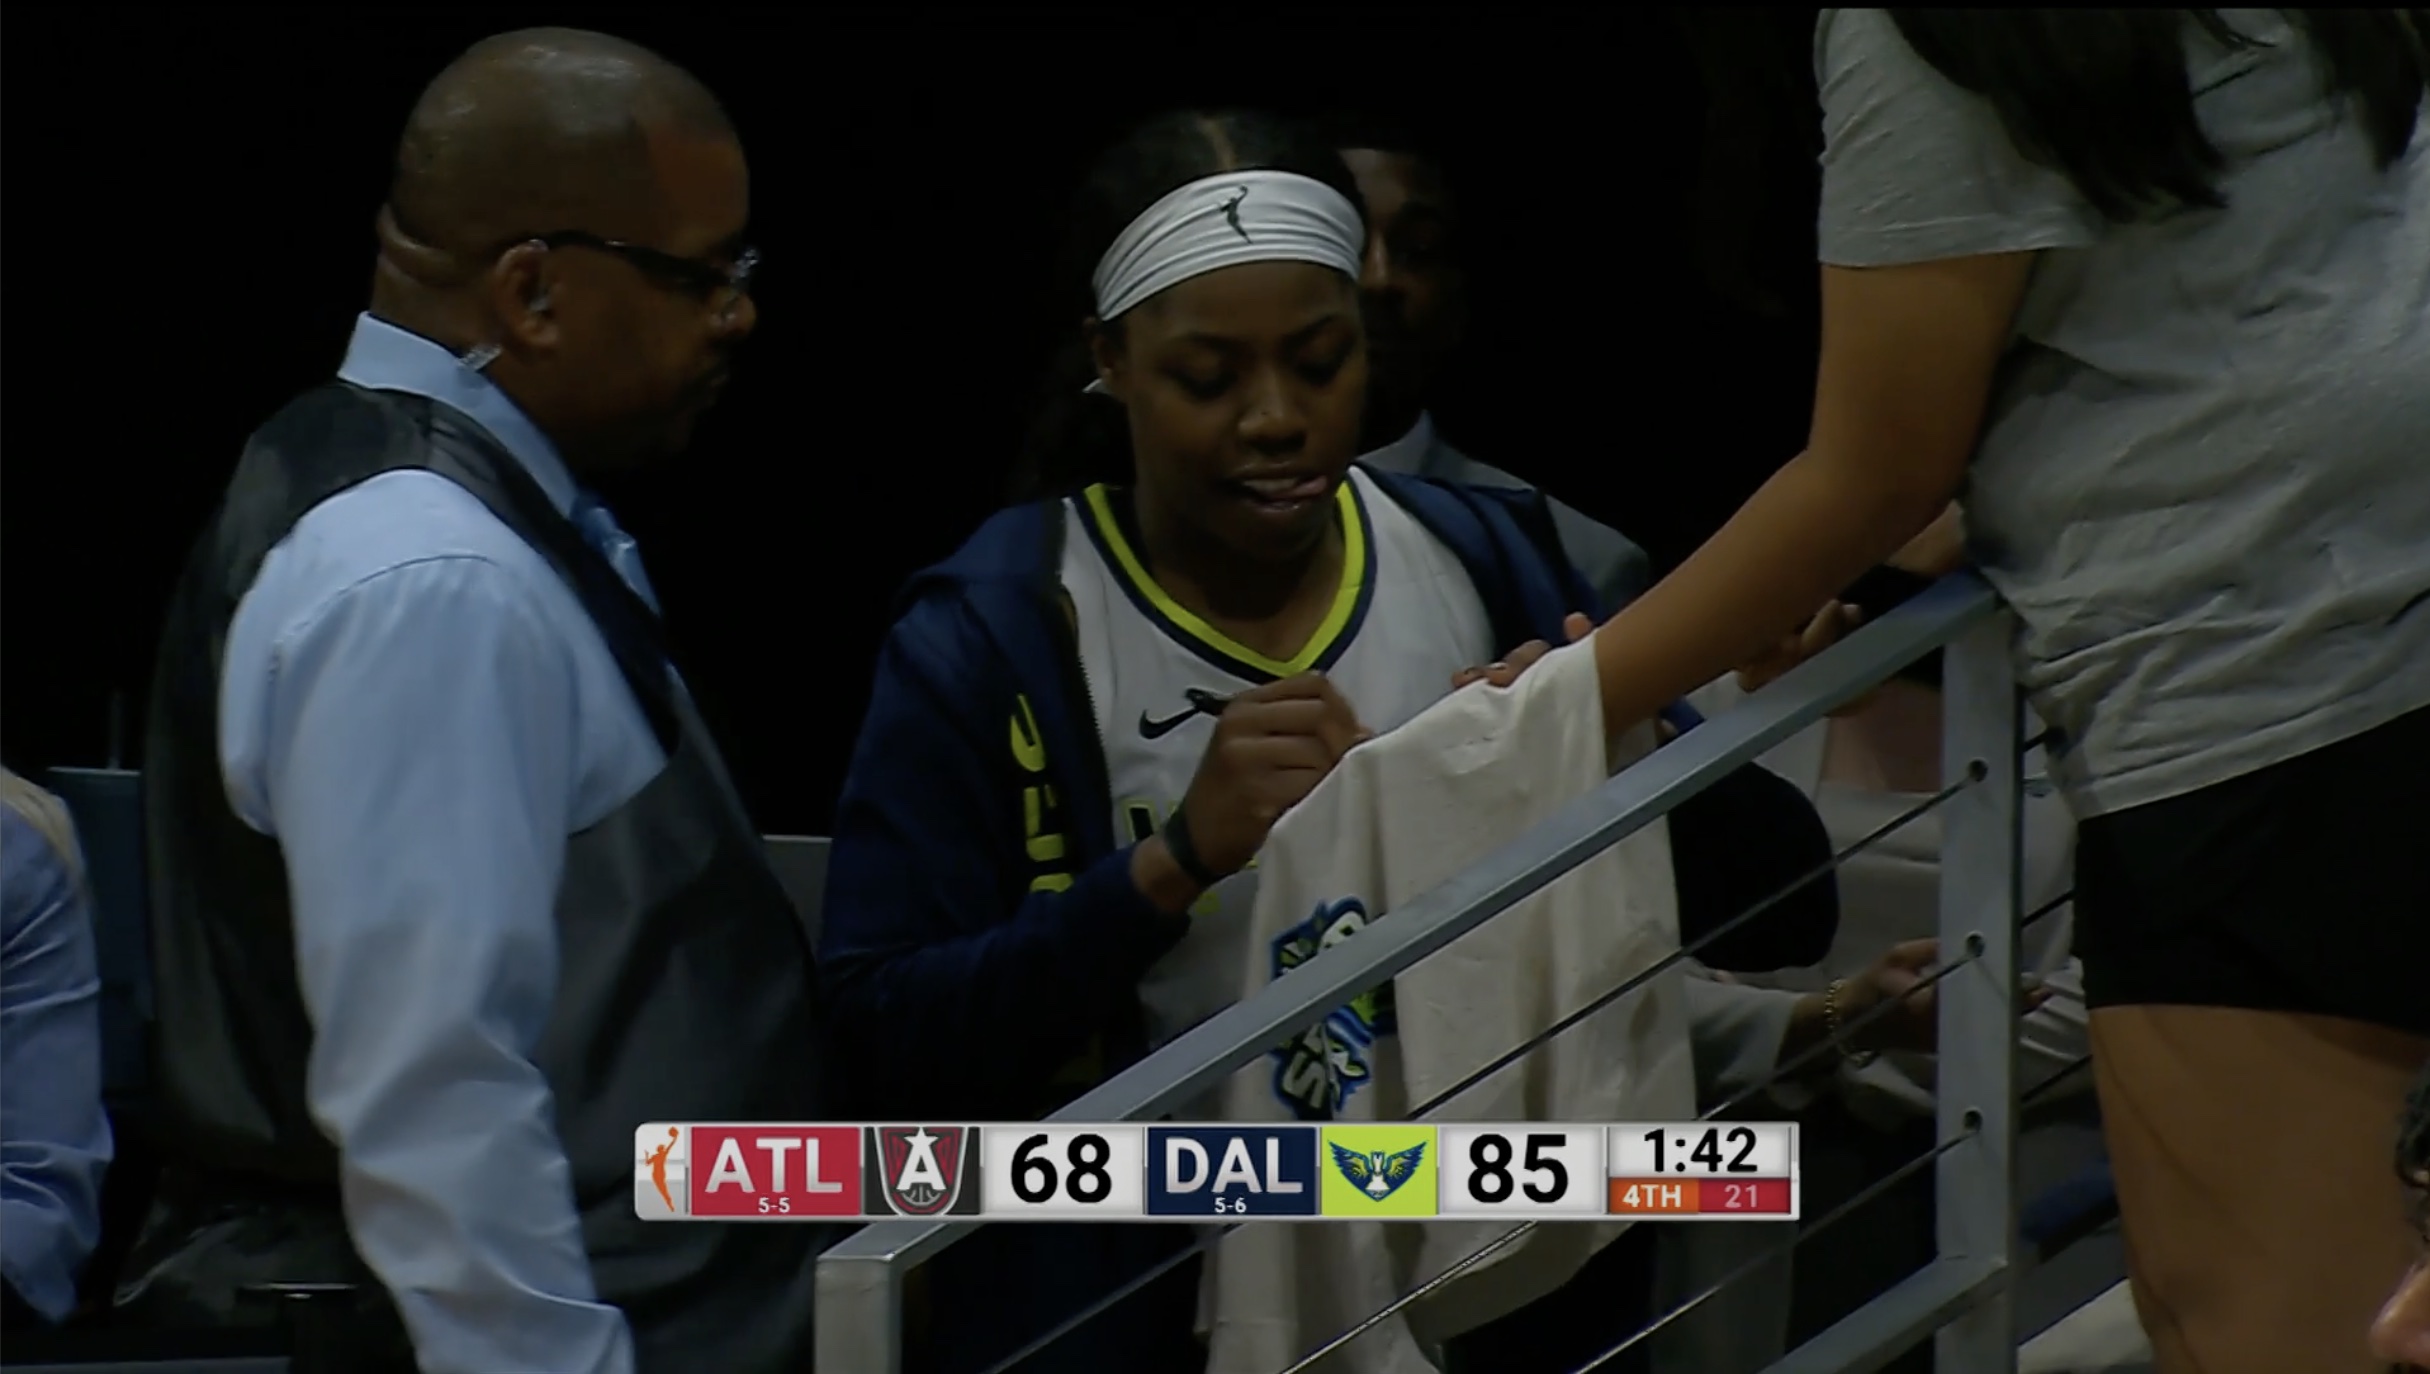 Arike Ogunbowale signs a t-shirt for a fan after being ejected.